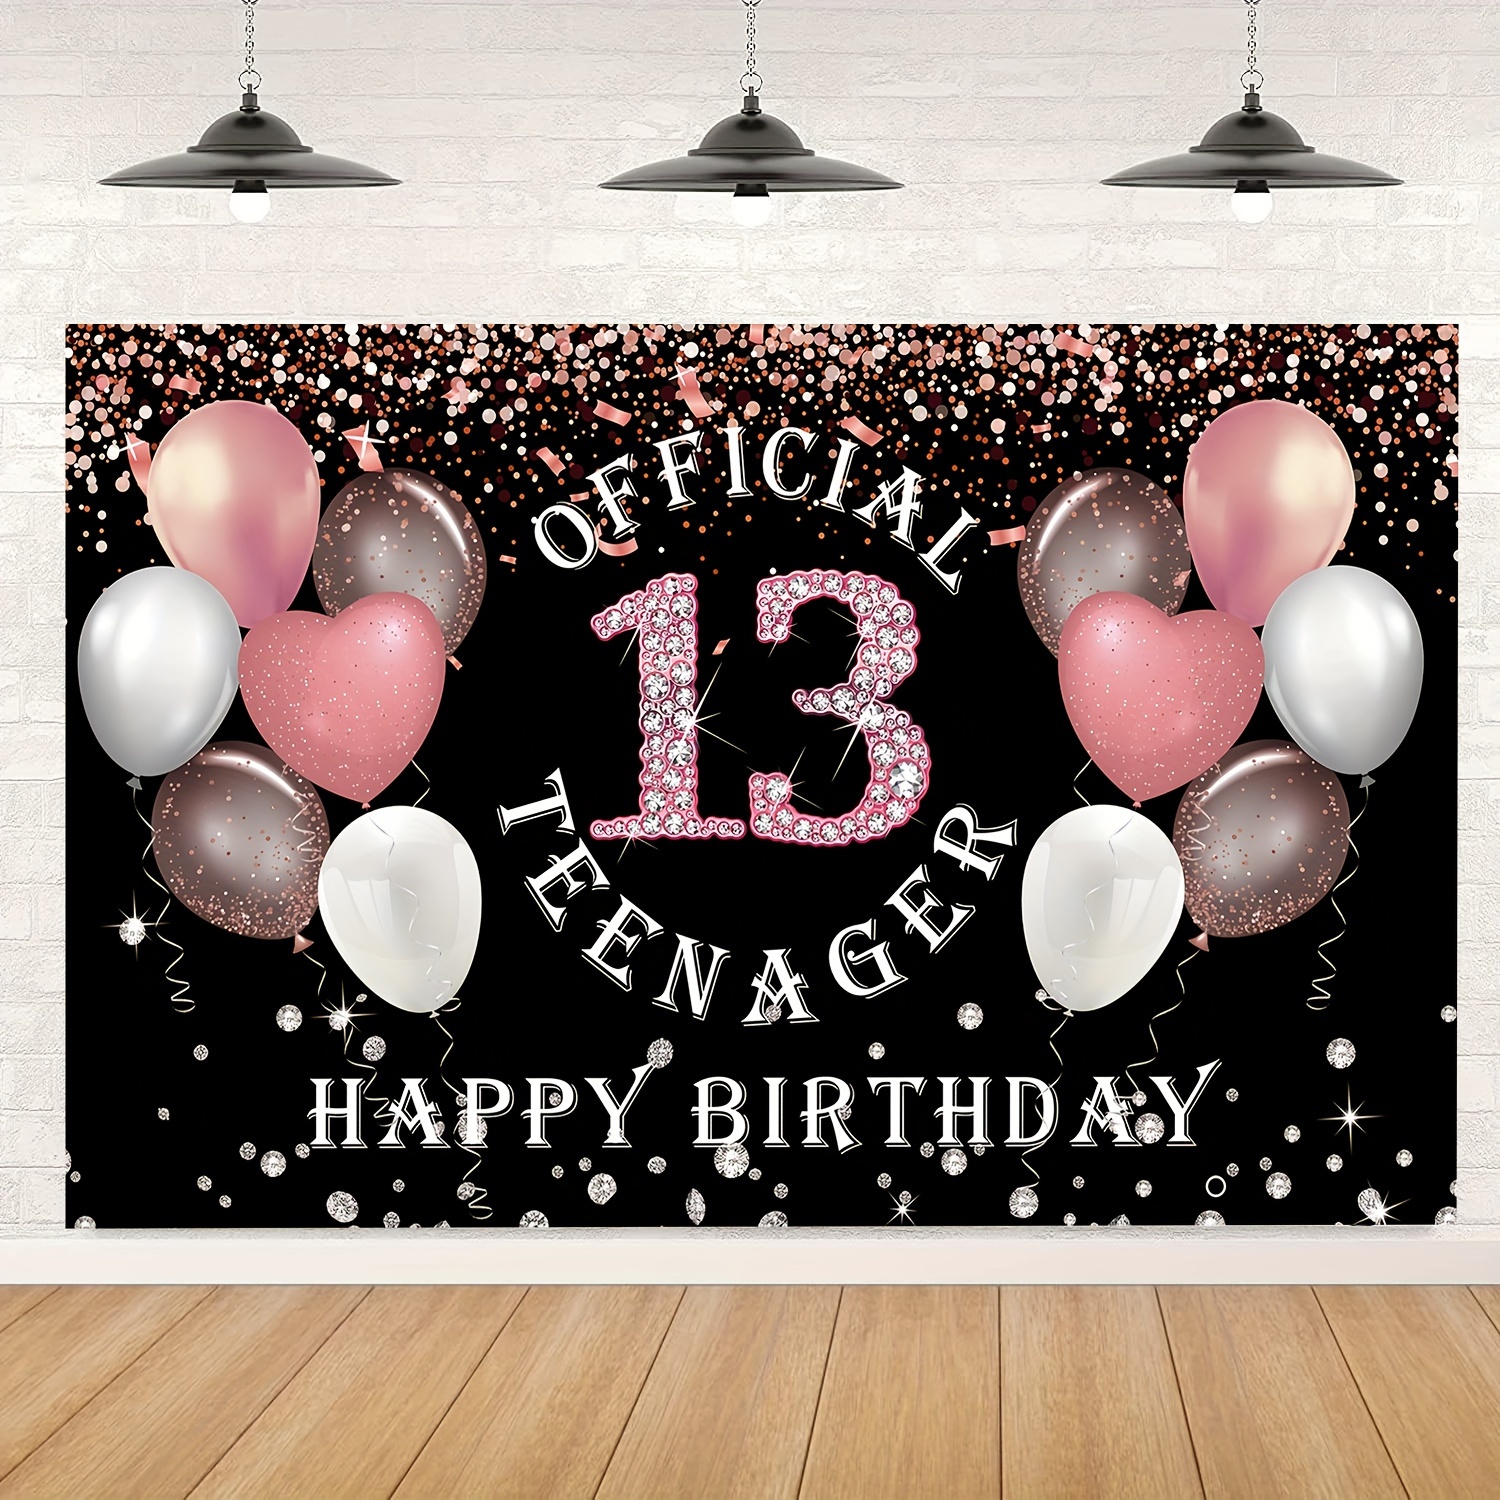  7th Birthday Gifts for Girls, Gifts for 7 Year Old Girls Pillow  Covers 18X 18, 7th Birthday Girls, 7th Birthday Decorations for Girls,  7th Birthday Gift Ideas for Girl Daughter Sister